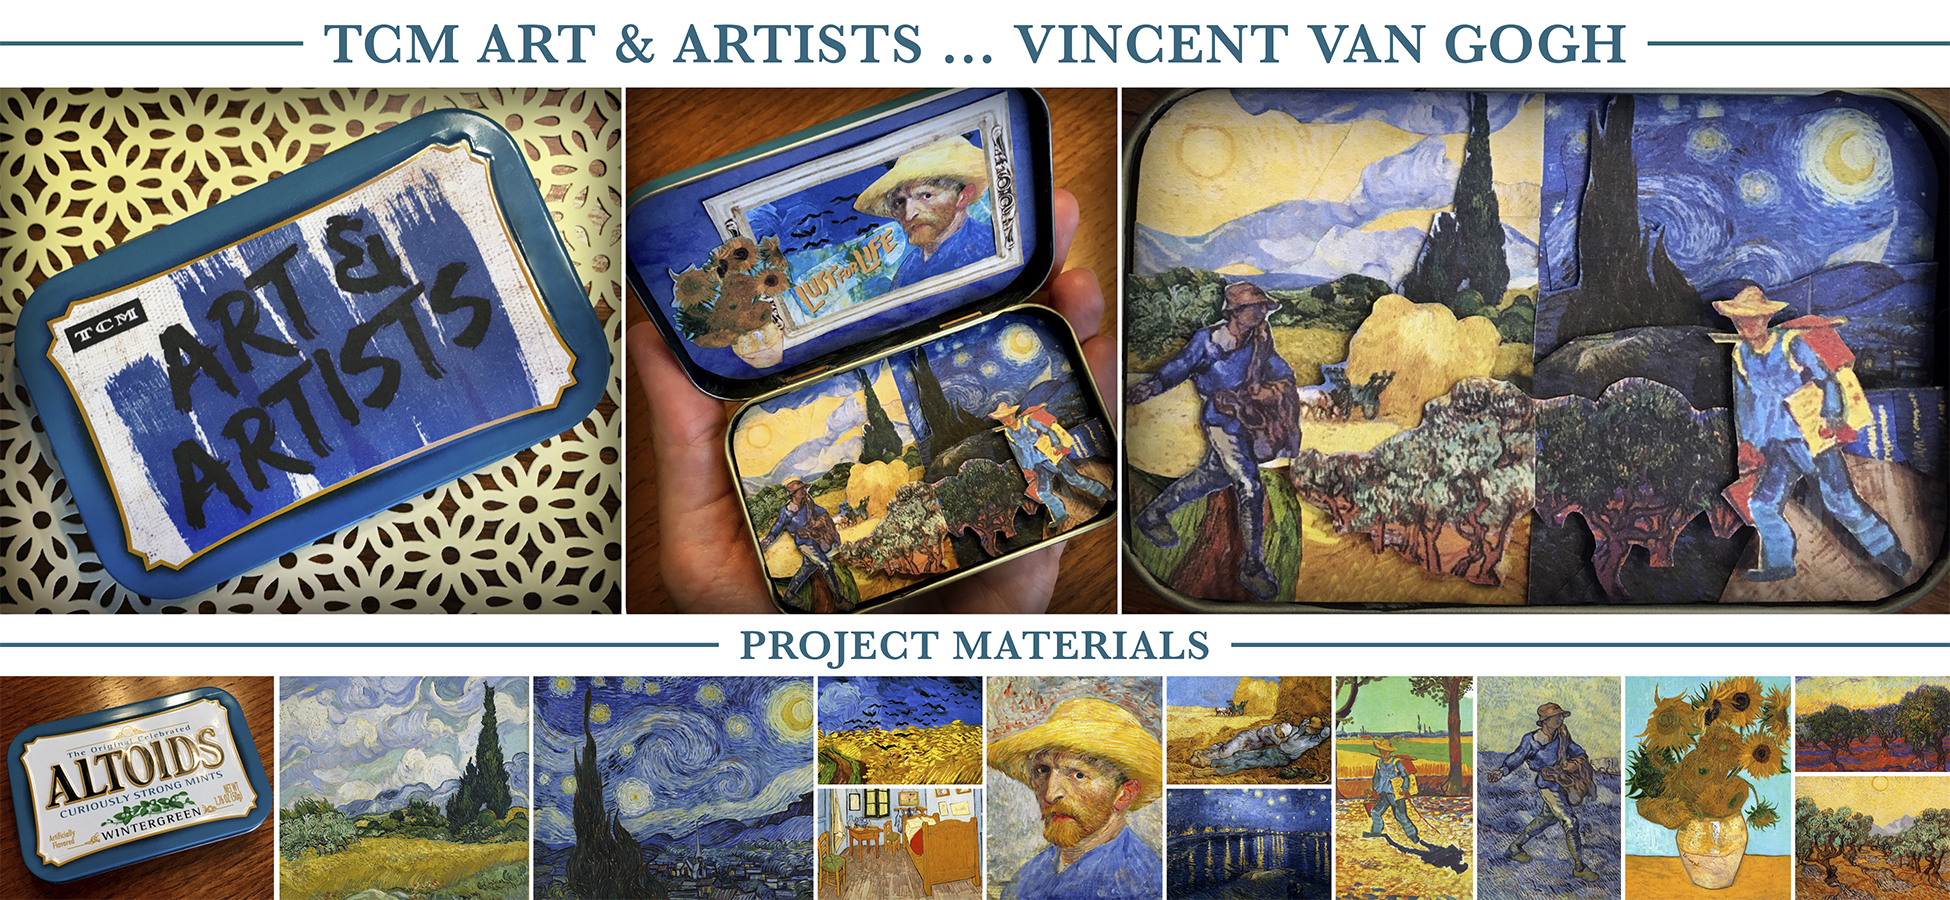 Mini-diorama for the Vincent Van Gogh biopic "Lust for Life"